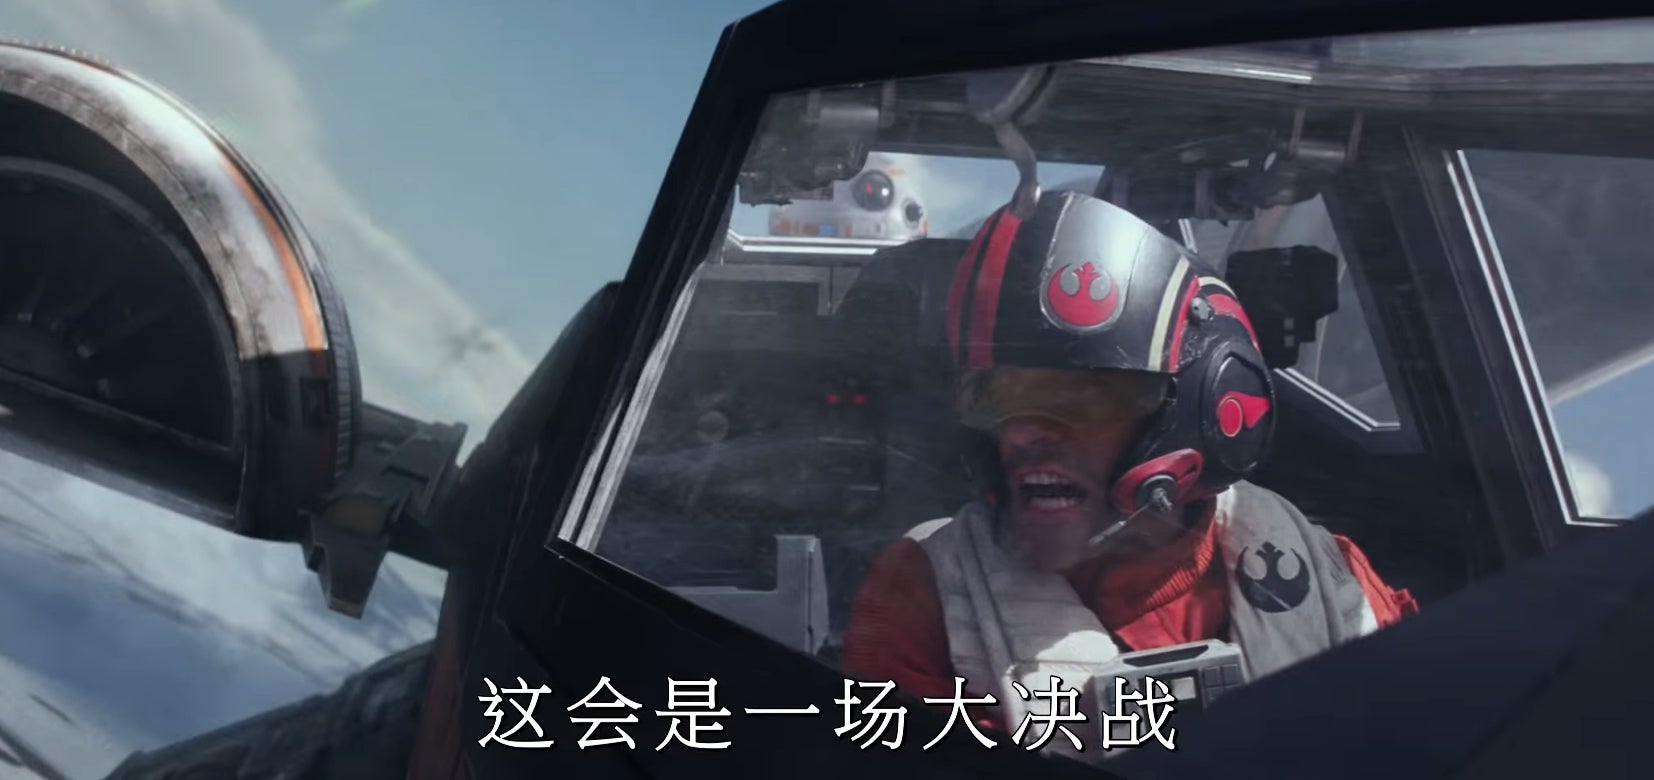 Shot from the Chinese trailer for Star Wars: The Force Awakens